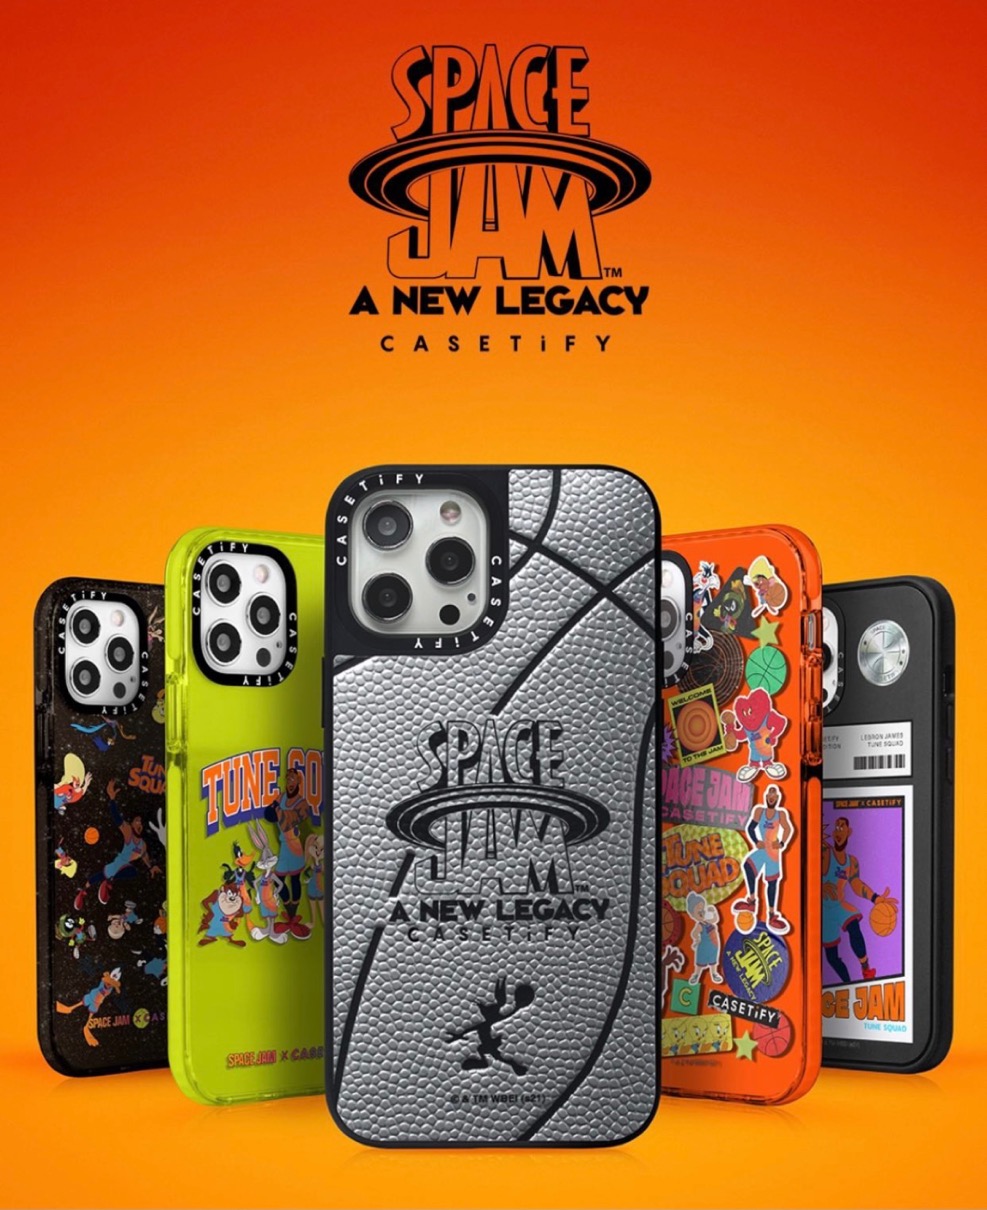 Space Jam A New Legacy Casetify コラボコレクションが国内8月31日に発売予定 Up To Date